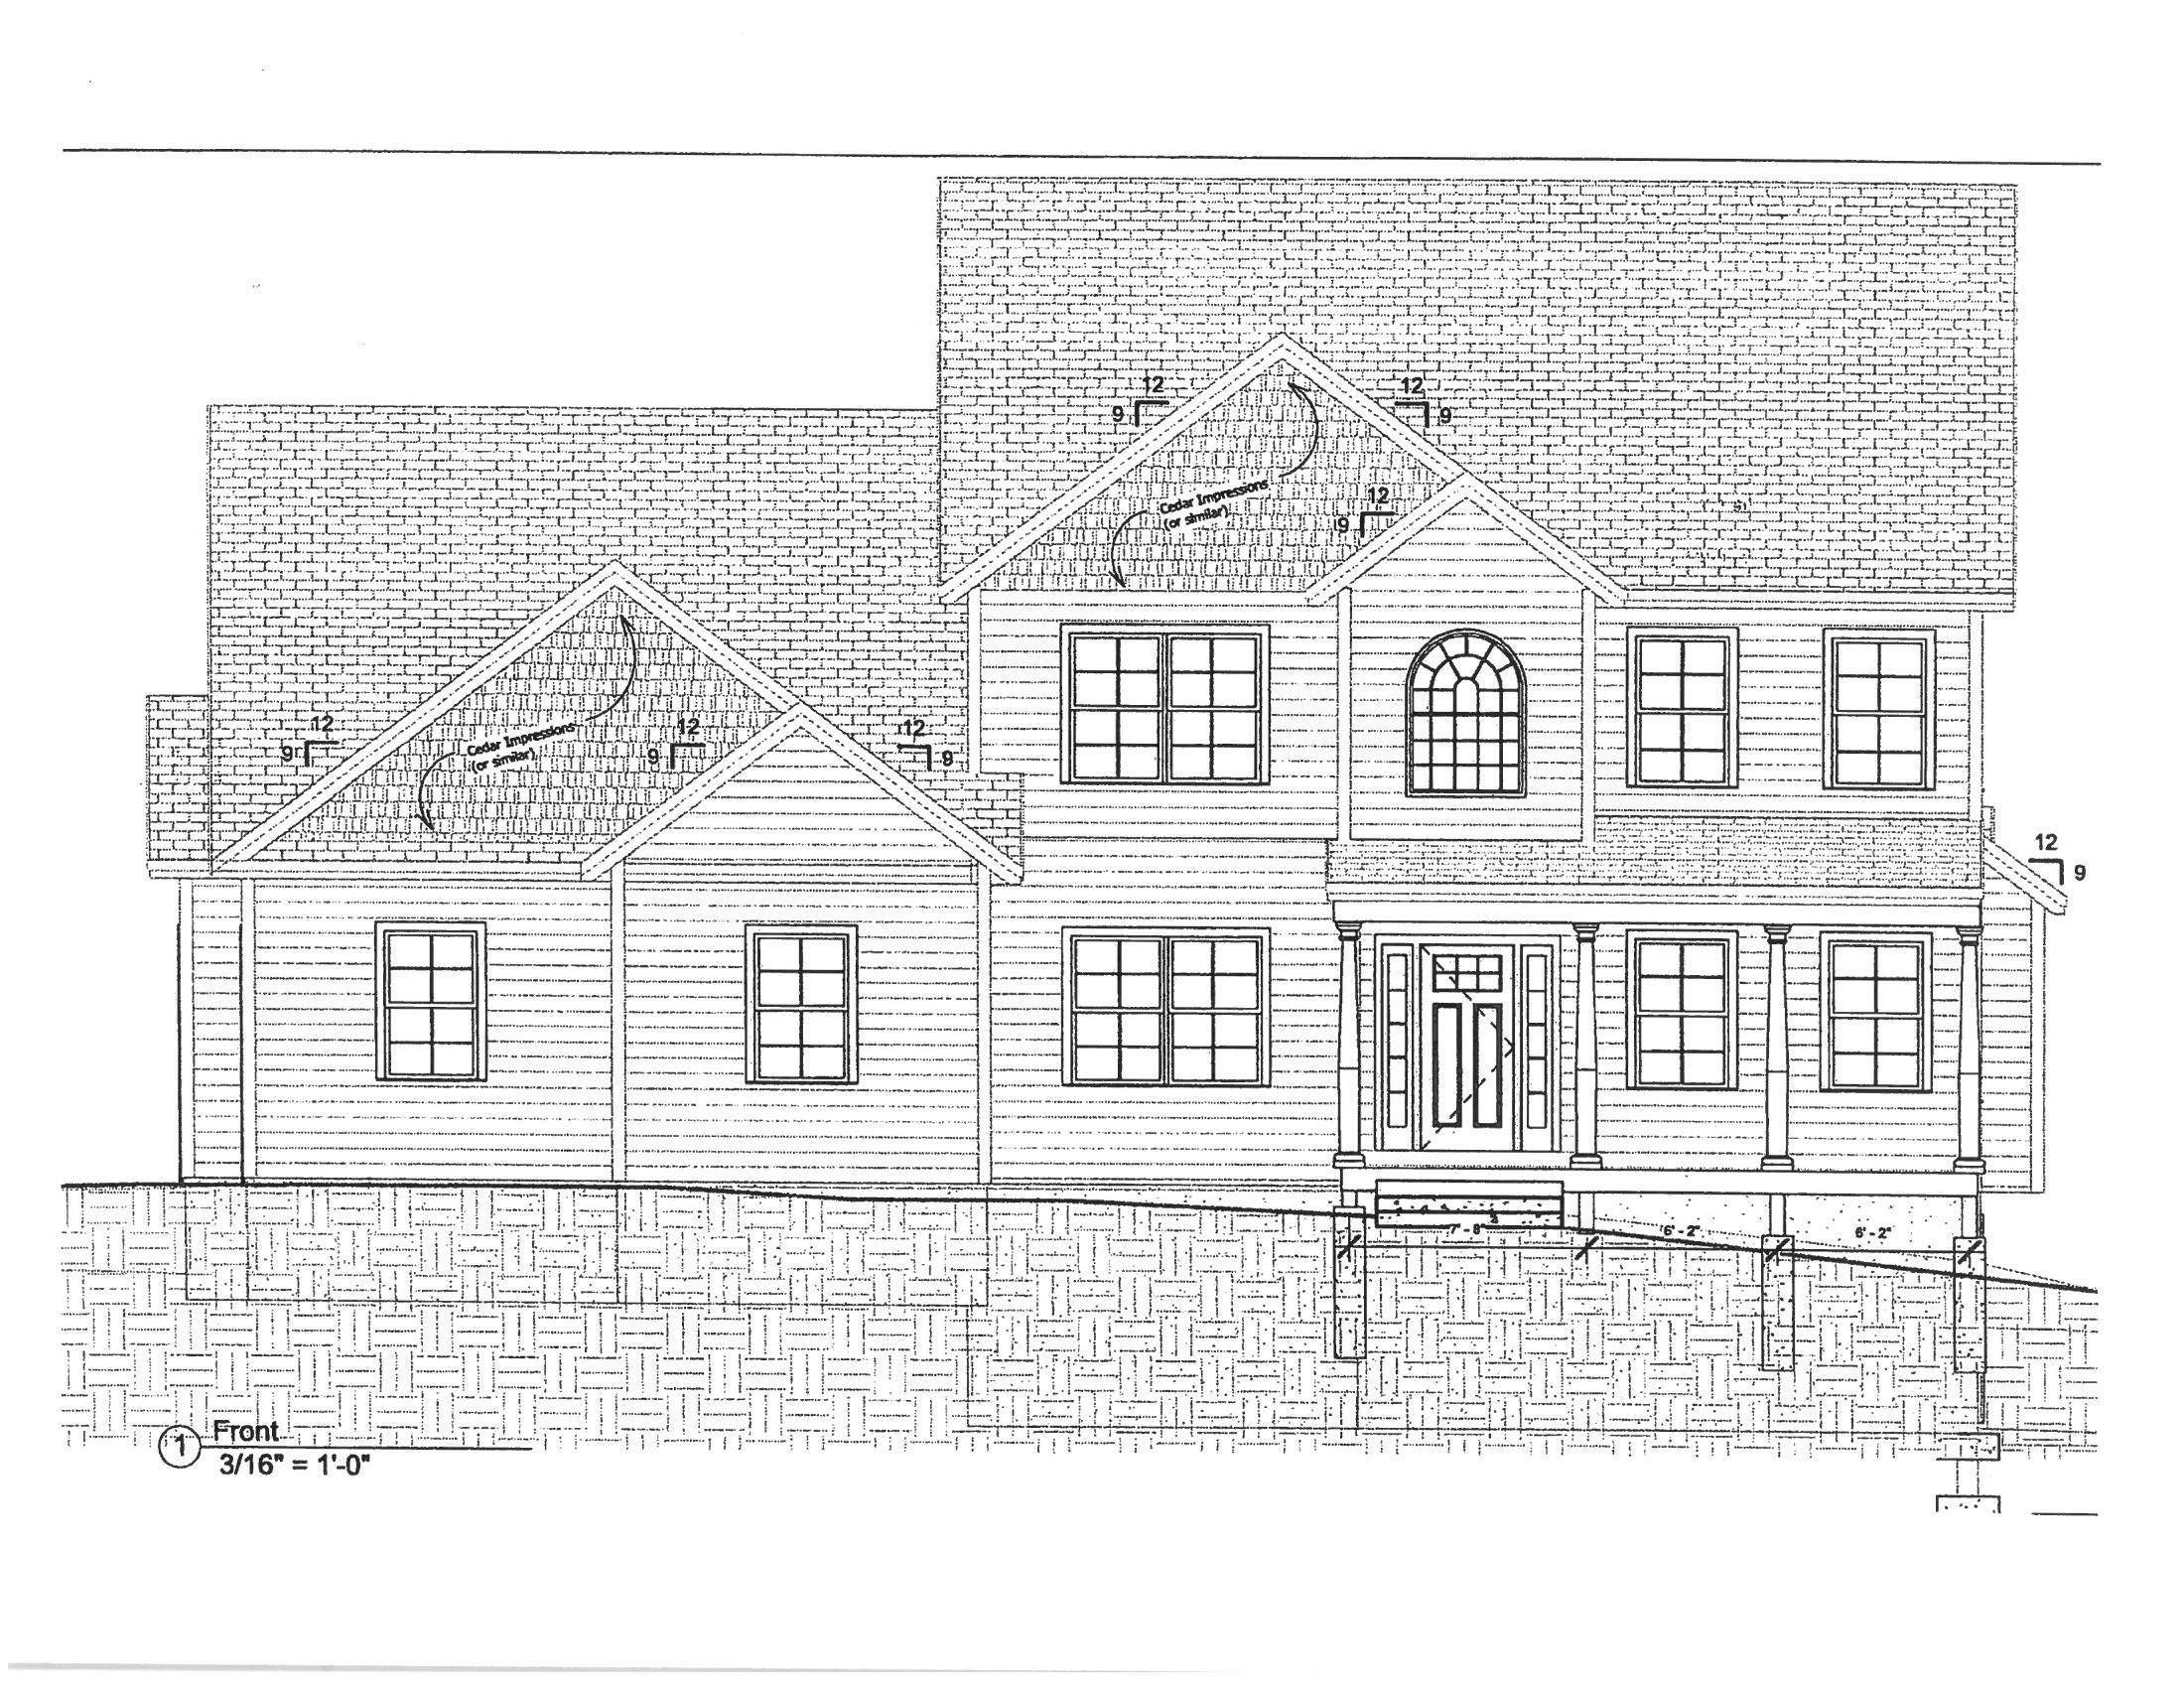 NEW CONSTRUCTION! NORTH NASHUA...almost 3,000 sq. ft. open concept kitchen with breakfast nook and walk in pantry flowing into large family room with gas fireplace formal living and dining room...mud room, 4 spacious bedrooms, walkout lower level...all this on over 3/4 acres!